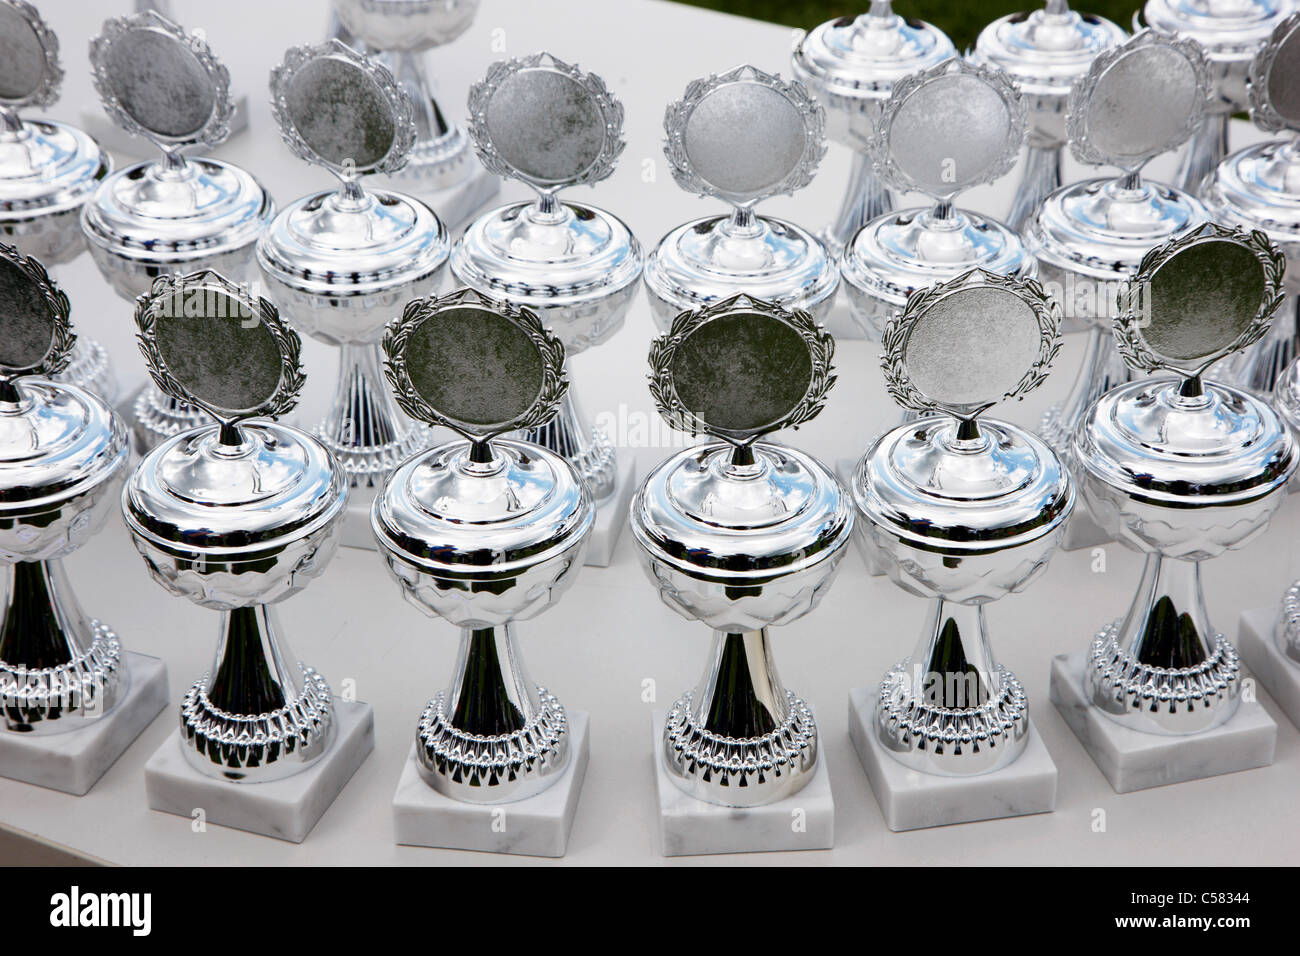 Silver cups waiting for winners of a sports competition. Stock Photo